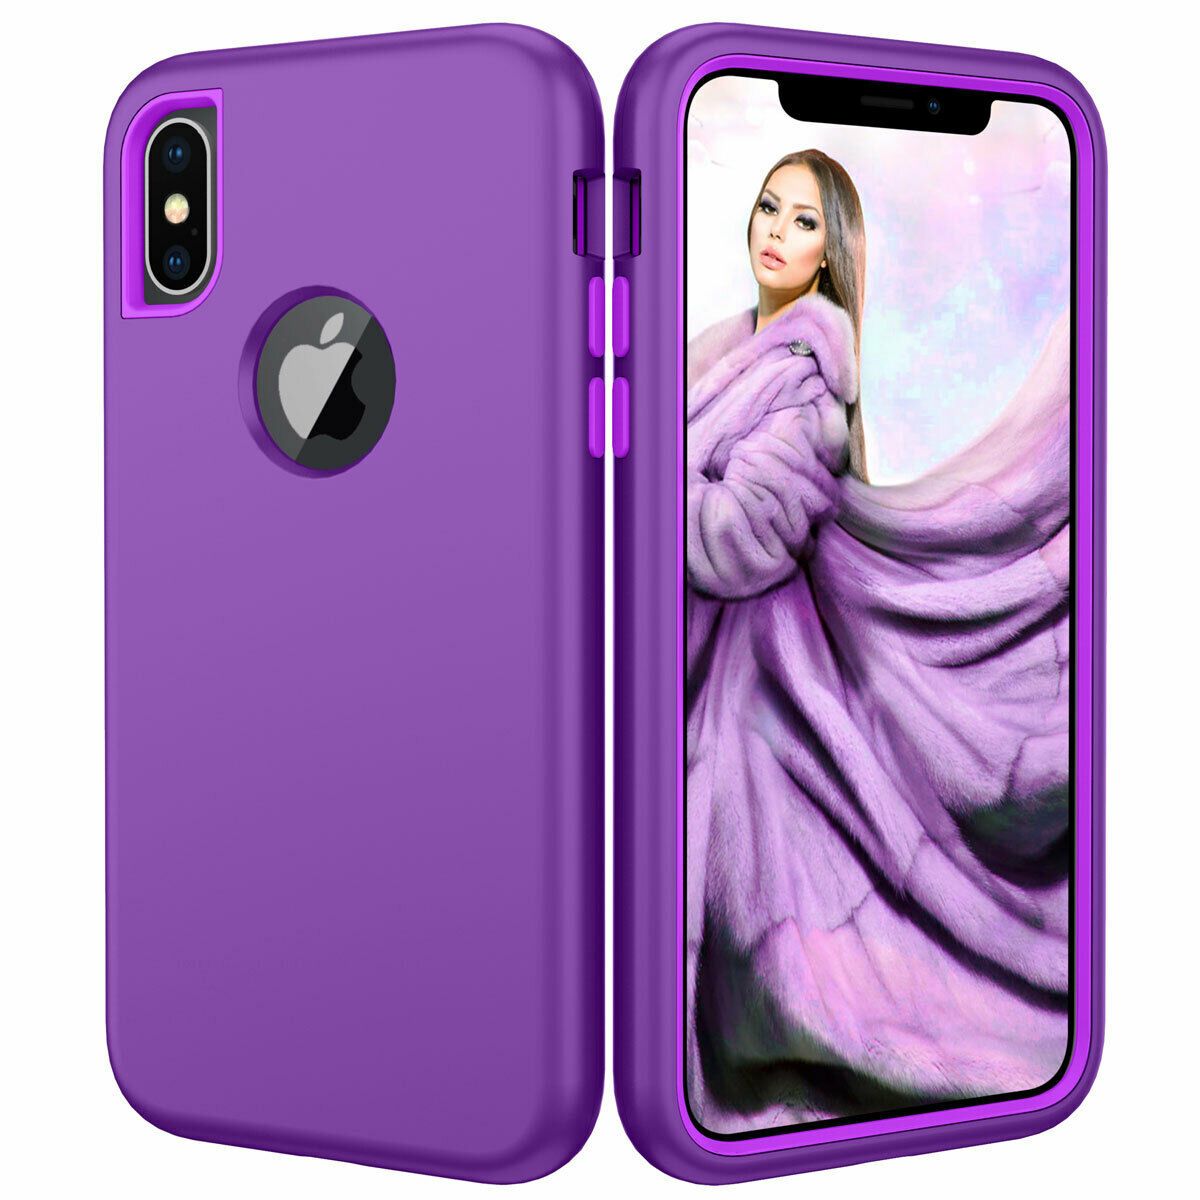 Case For iPhone X Xr XS Max 6 7 8 Plus Shockproof 360 Full Body Cover Protective detsarah Purple For iPhone Xs Max 